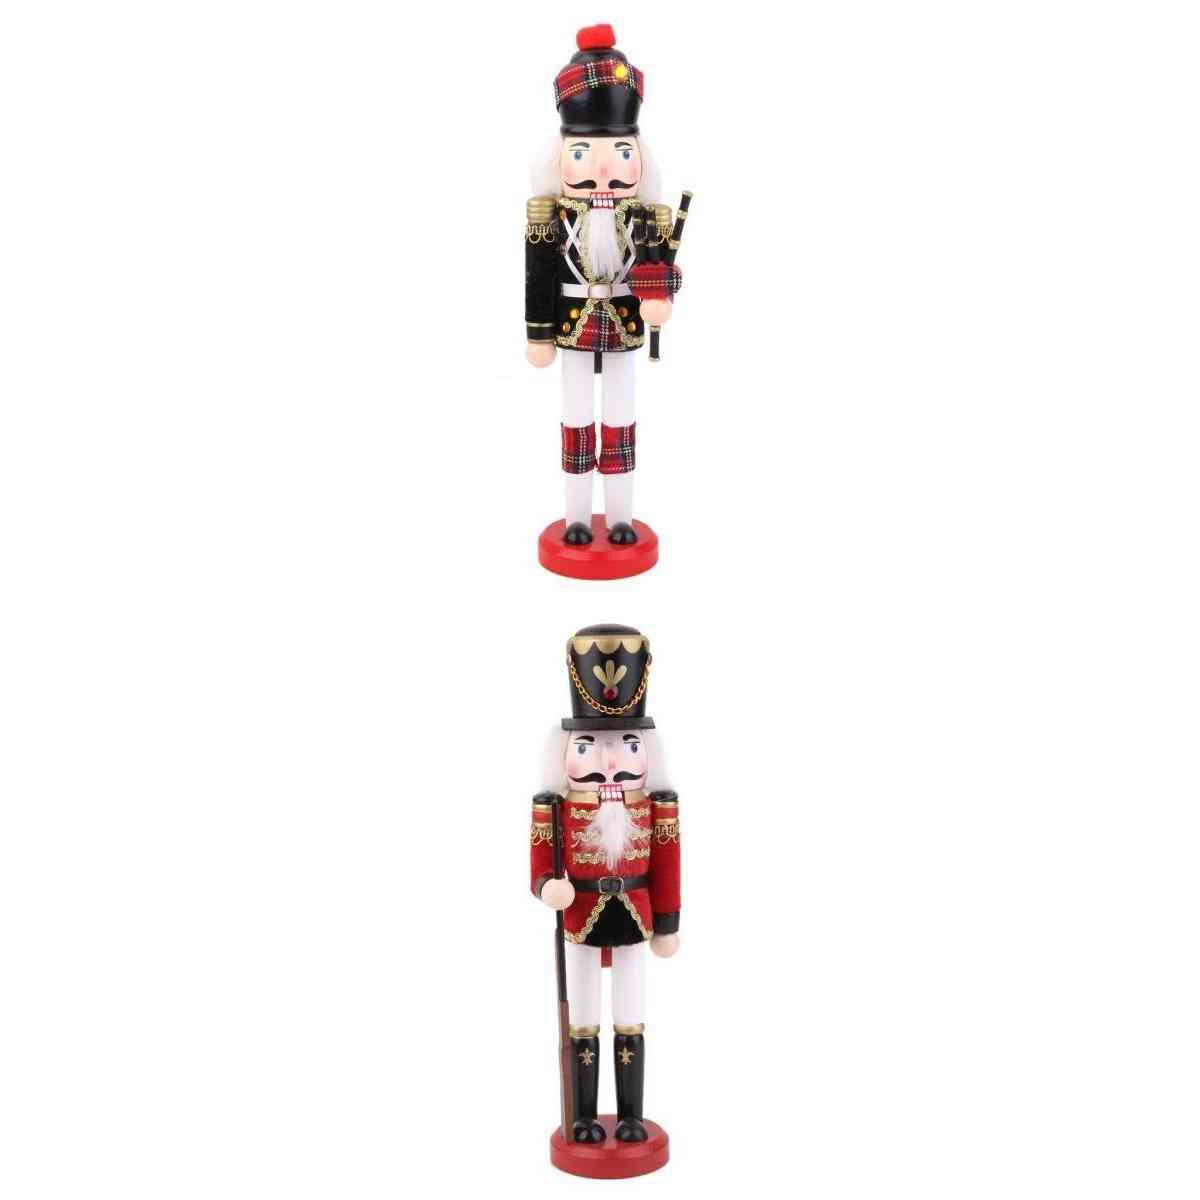 Wooden, Handmade, Nutcracker Soldier With Bagpipes - Home Decor